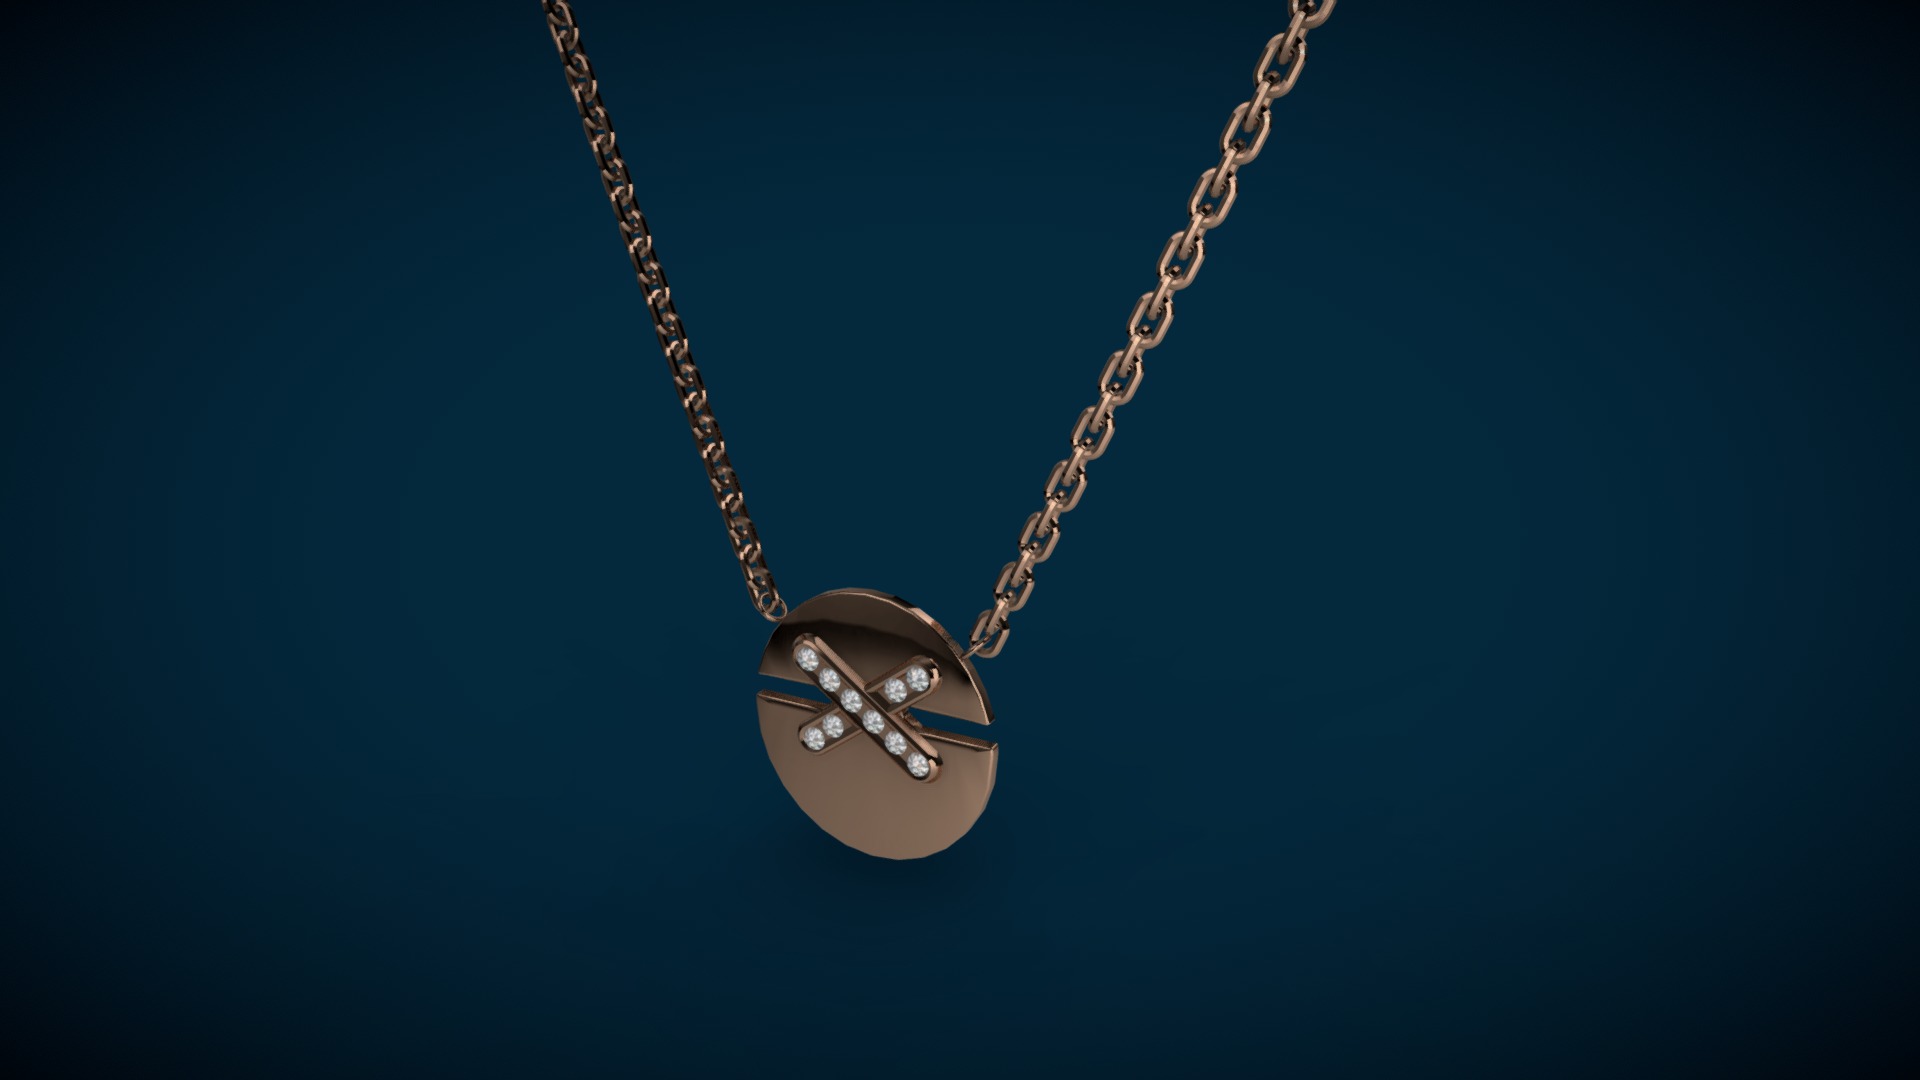 3D model Medaillon - This is a 3D model of the Medaillon. The 3D model is about a necklace with a pendant.